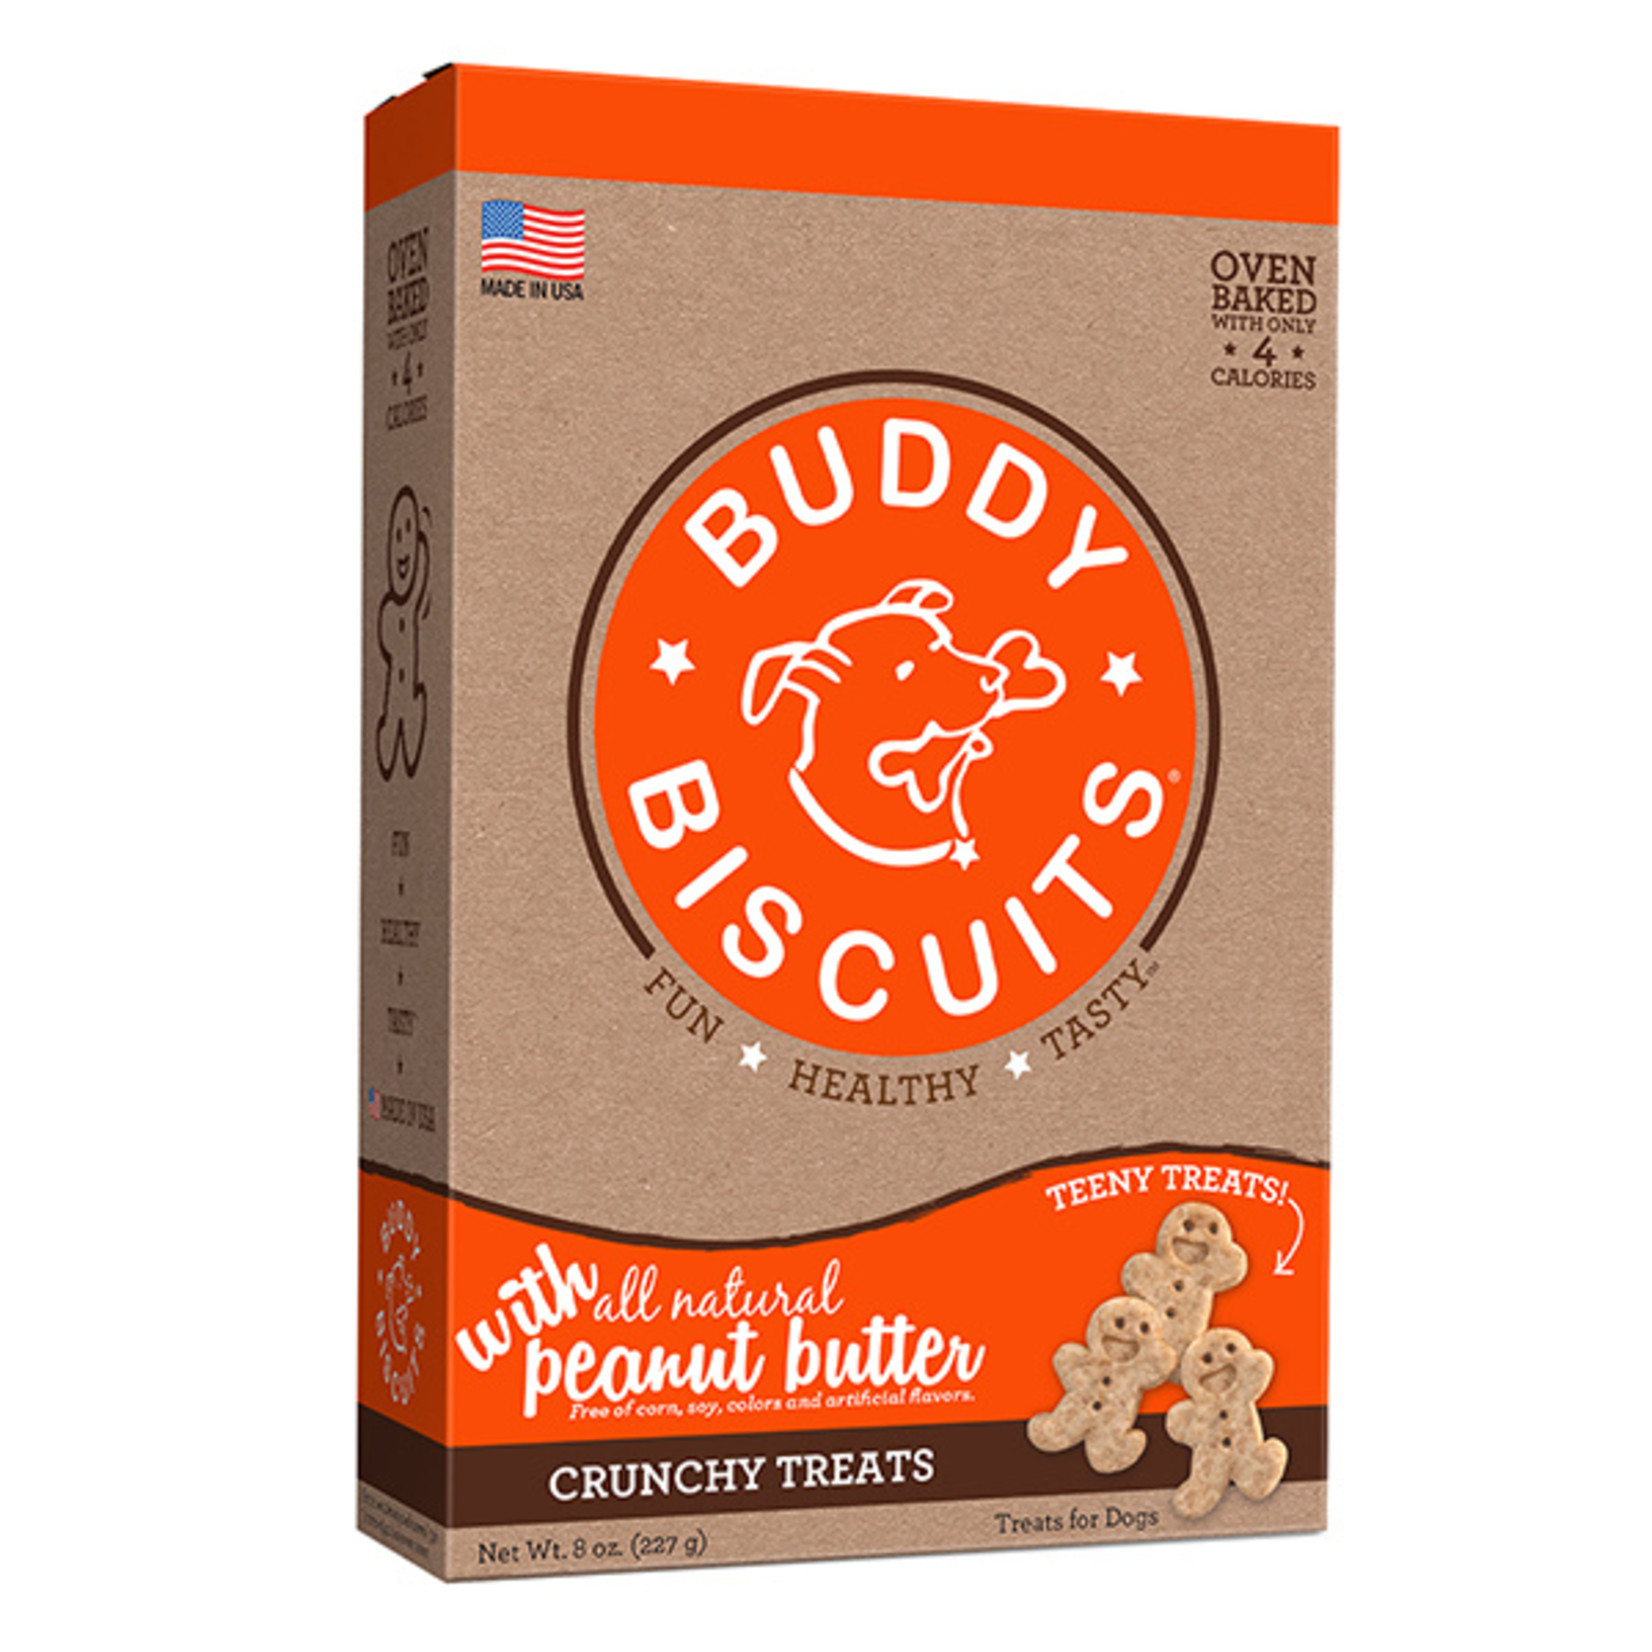 Cloud Star Buddy Biscuits Itty Bitty Oven Baked Peanut Butter Dog Treats 8oz